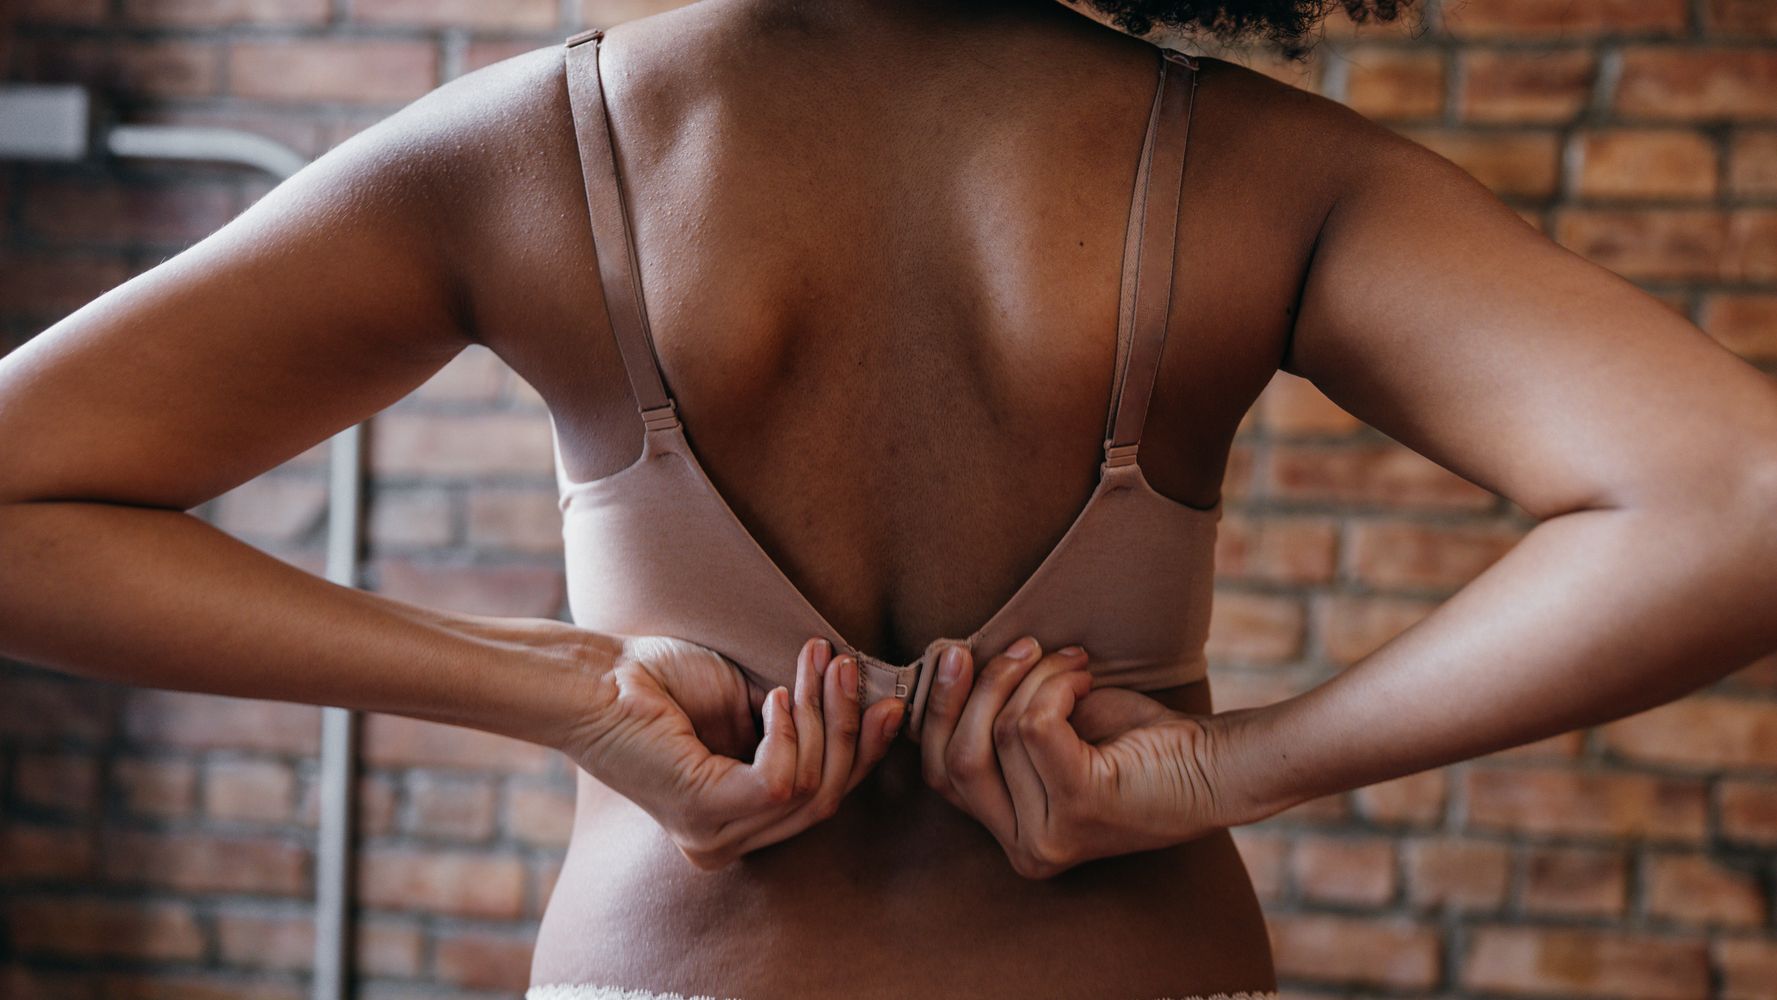 Have your bras and shapewear been causing you pain and letting you